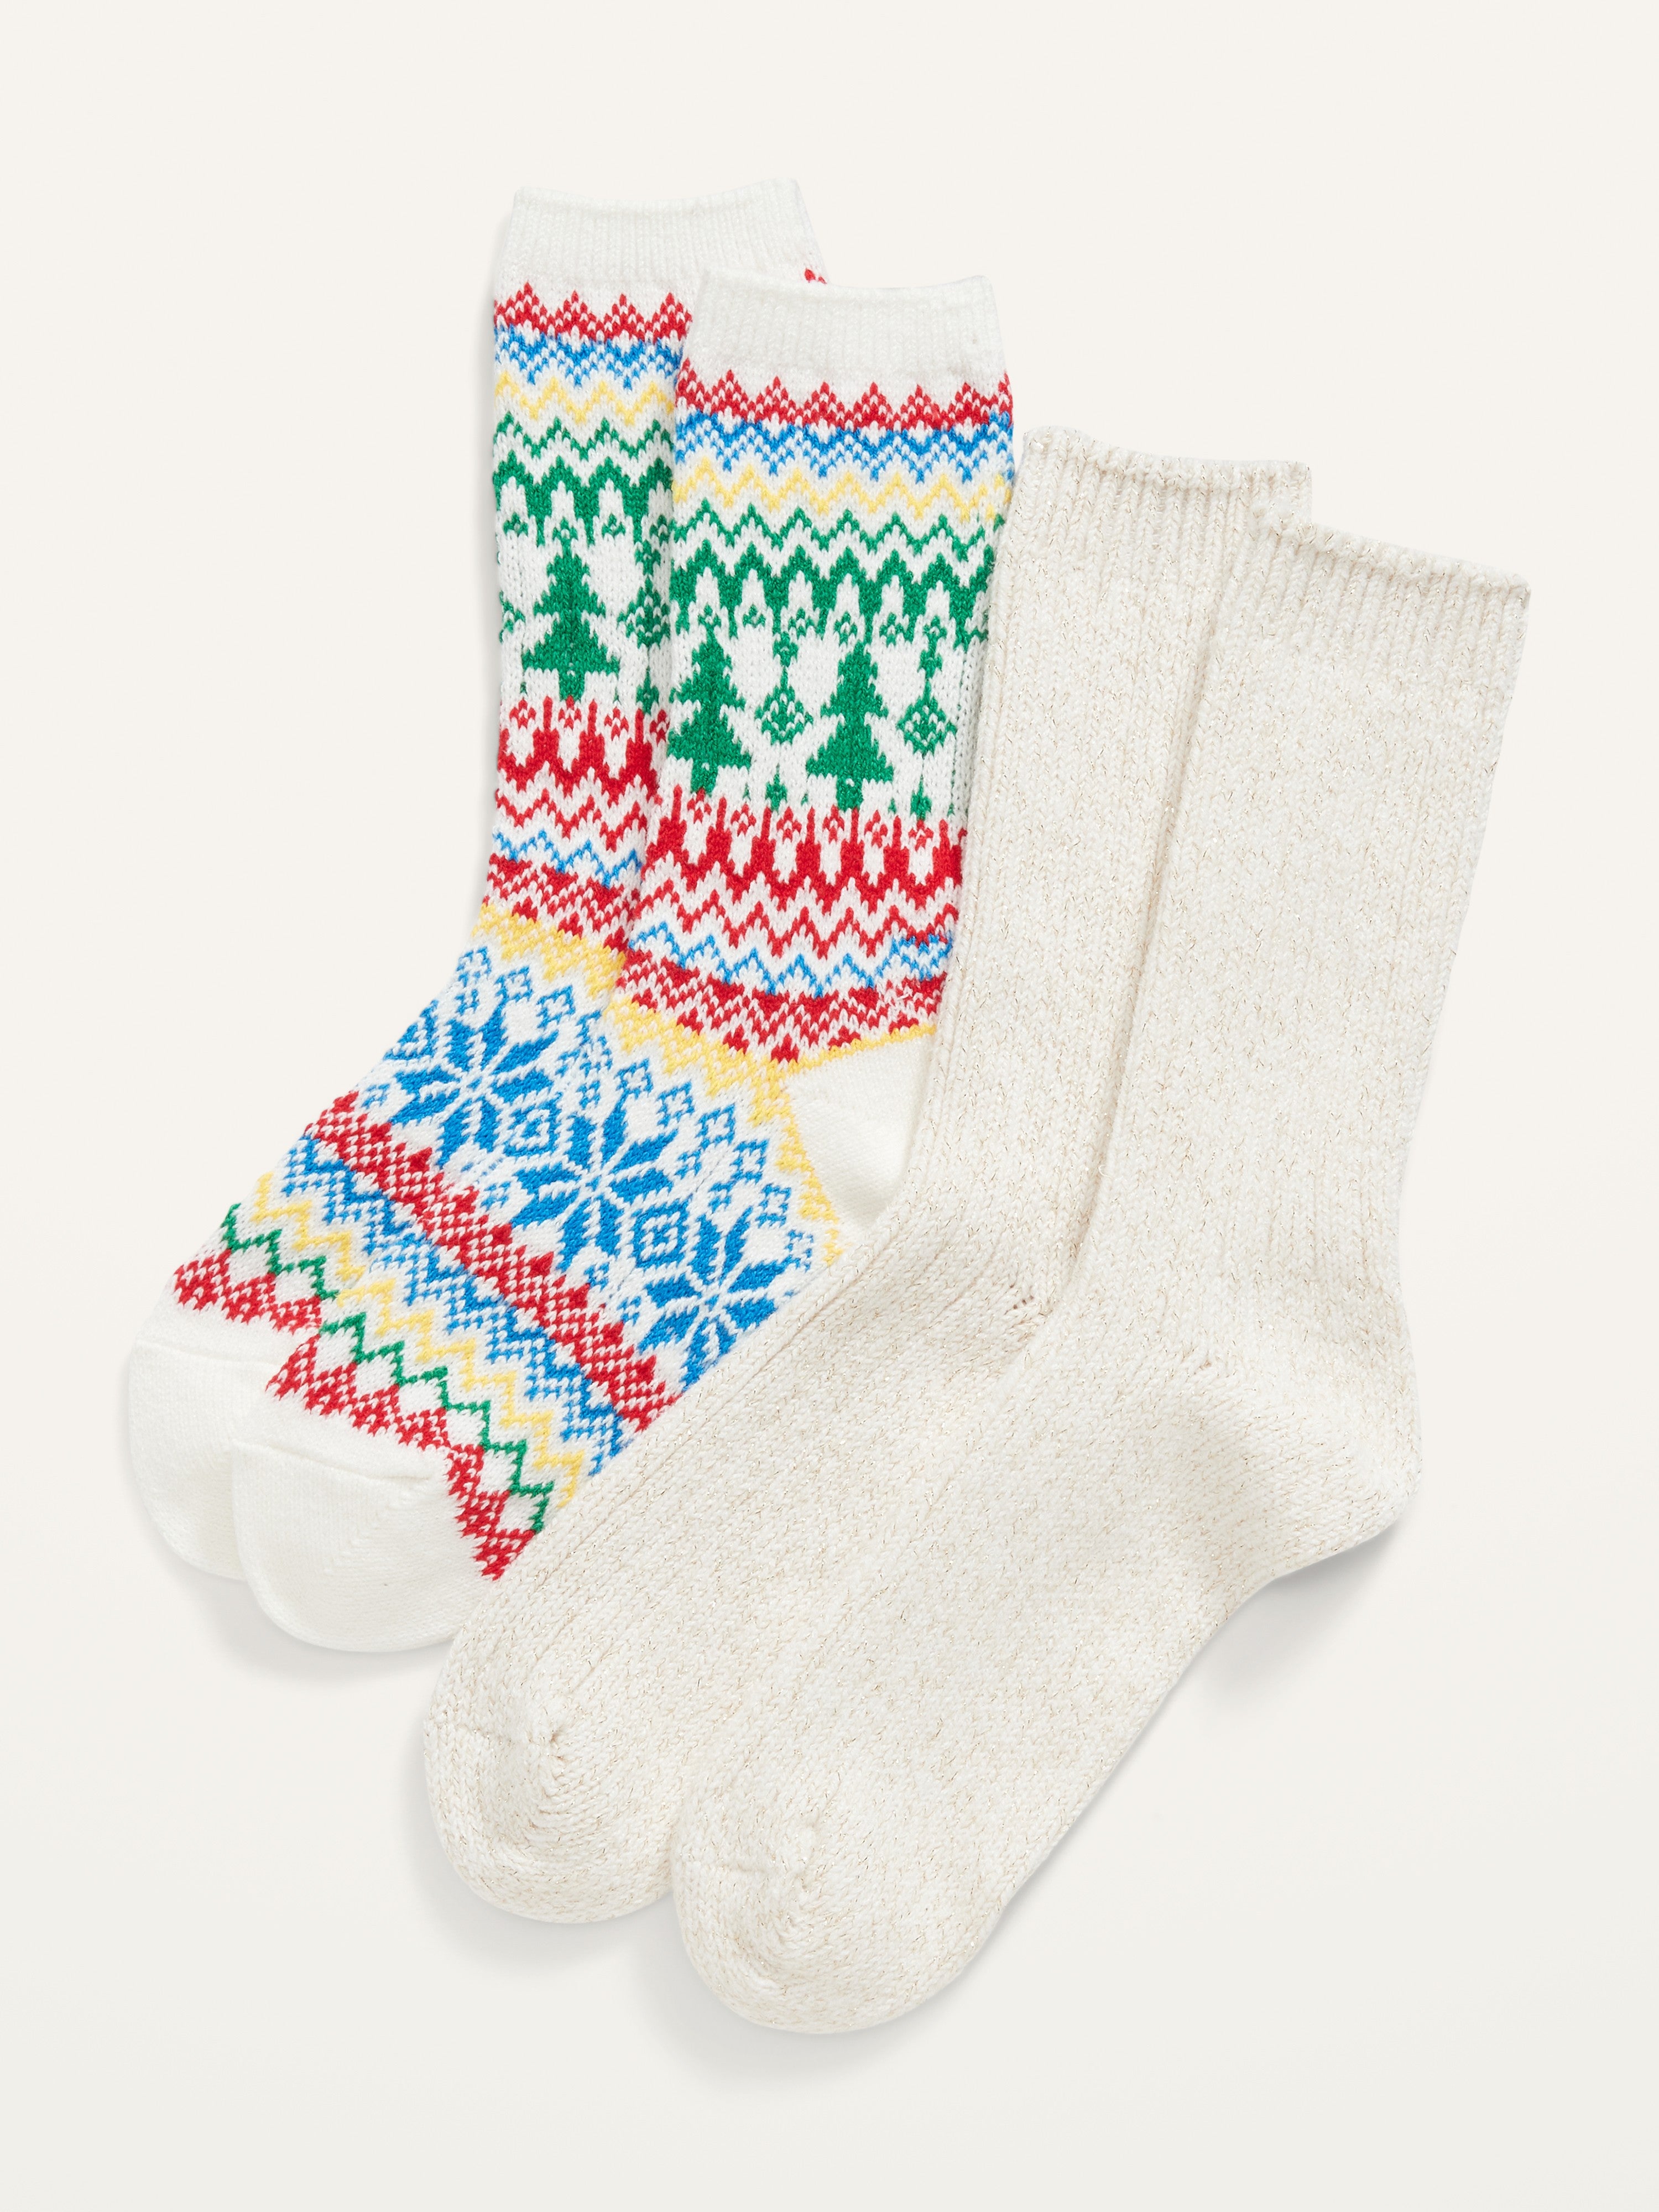 White socks and colorful Christmas-patterned socks